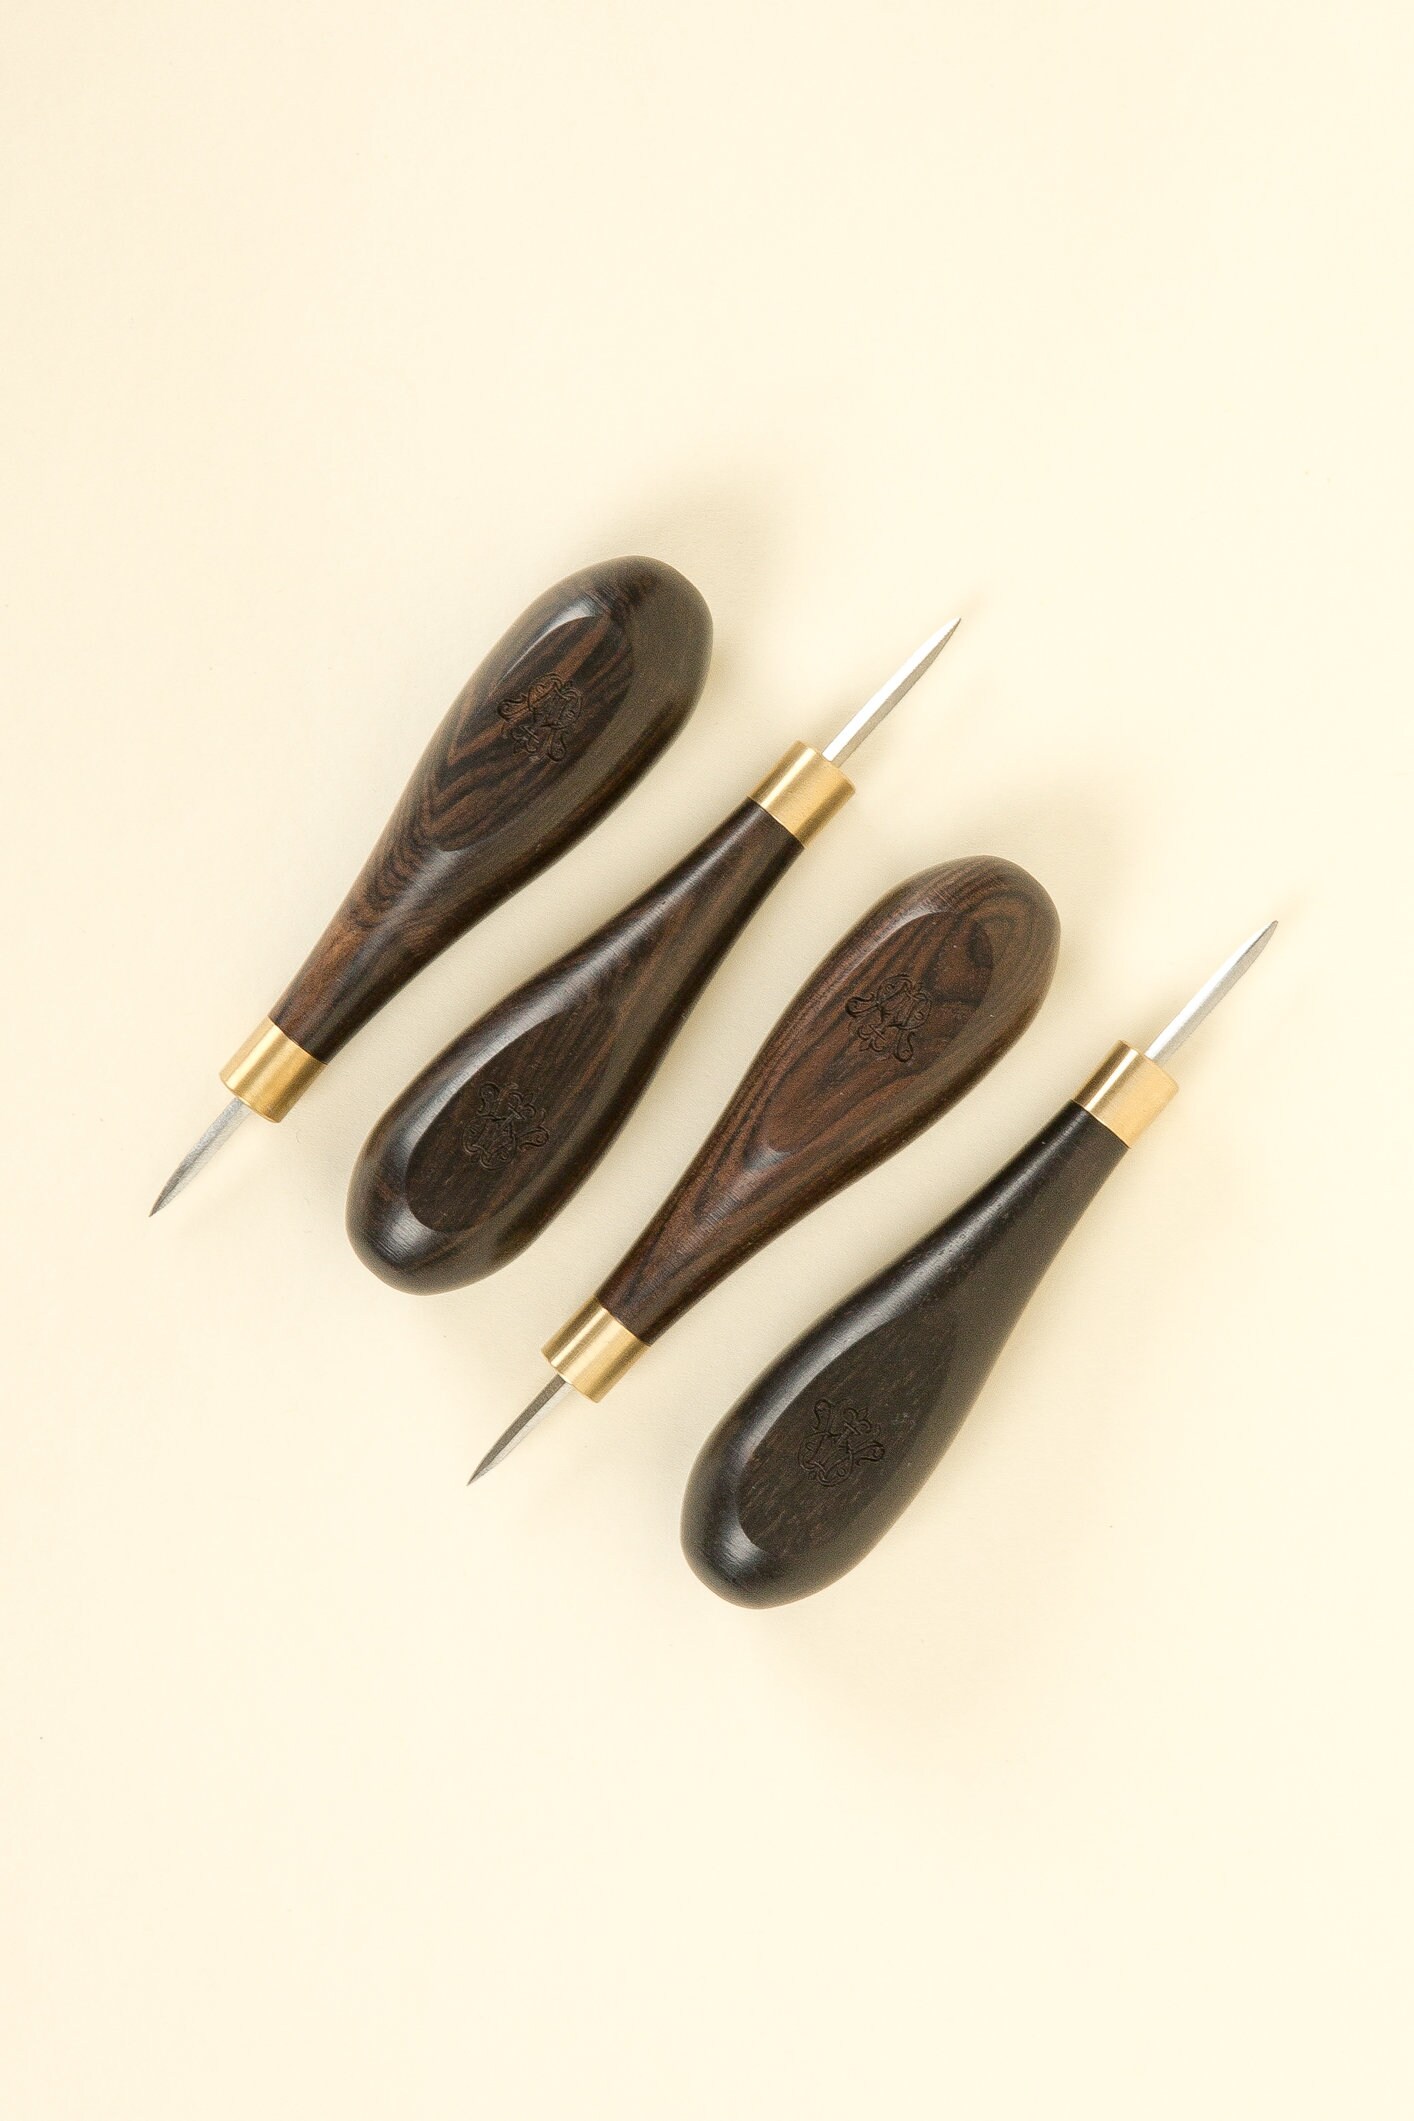 Leather Sewing Awl,stitching Awl,leather Craft Tools 